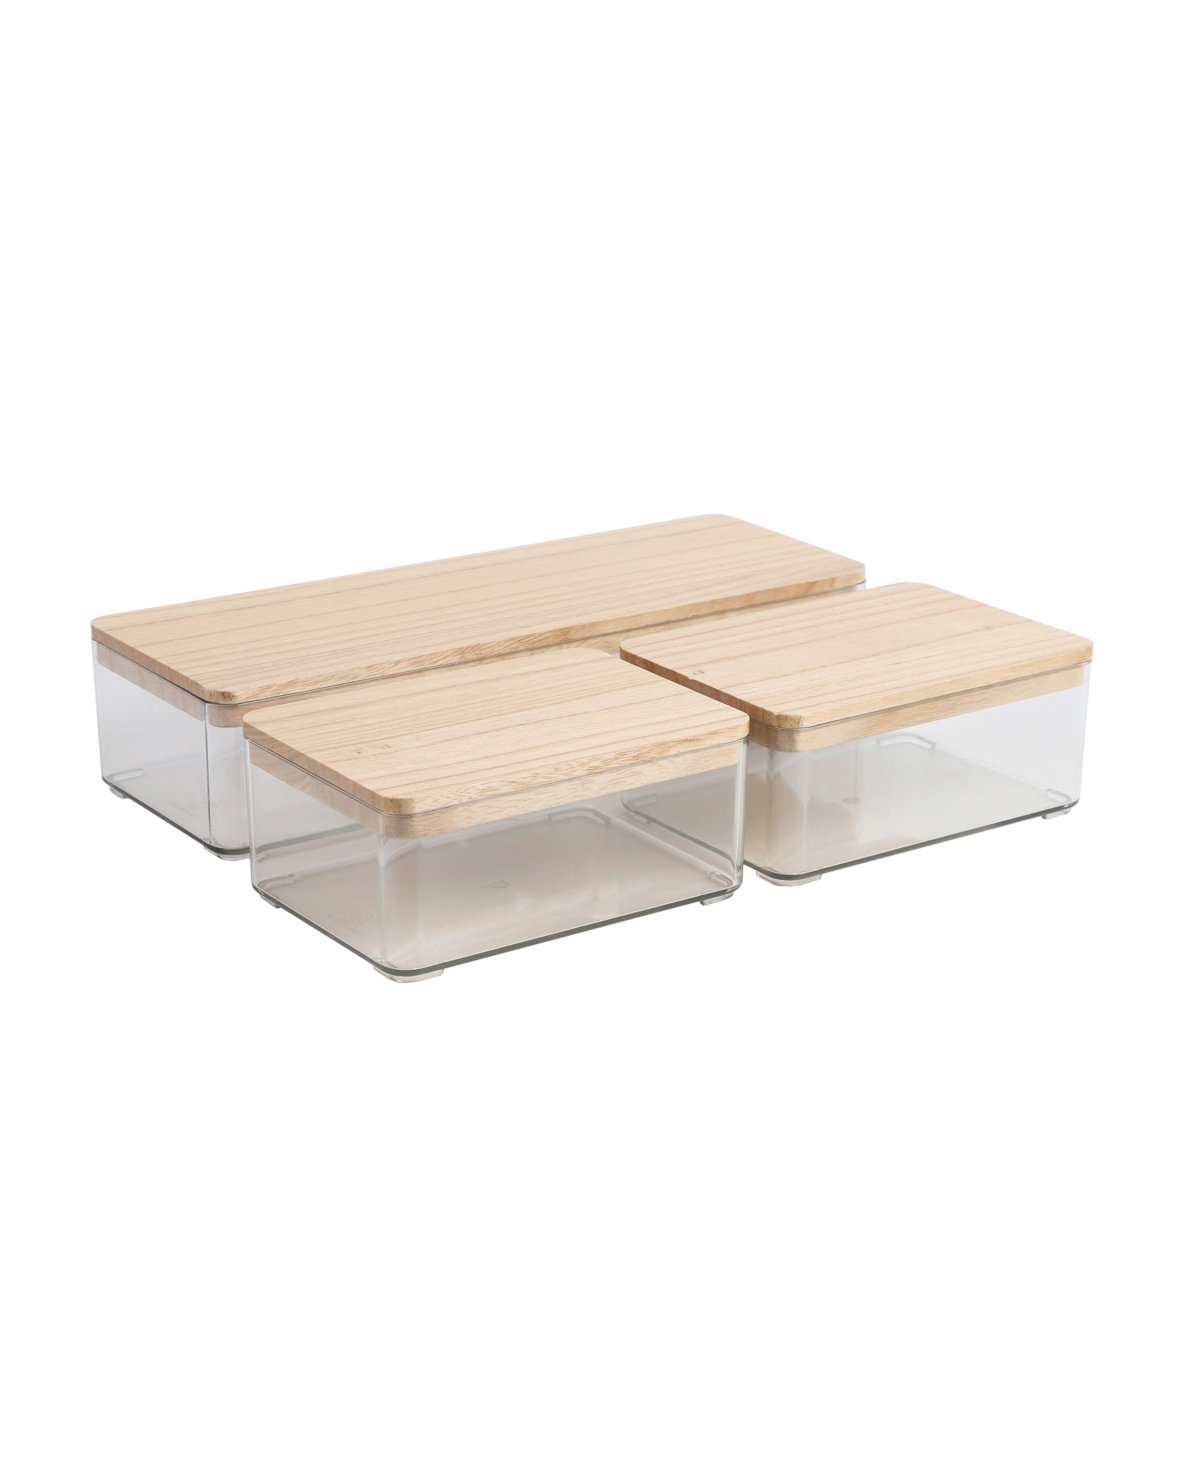 Martha Stewart Grady Set Of 3 Plastic Stackable Storage Boxes With Paulownia Wood Lids In Clear,light Natural